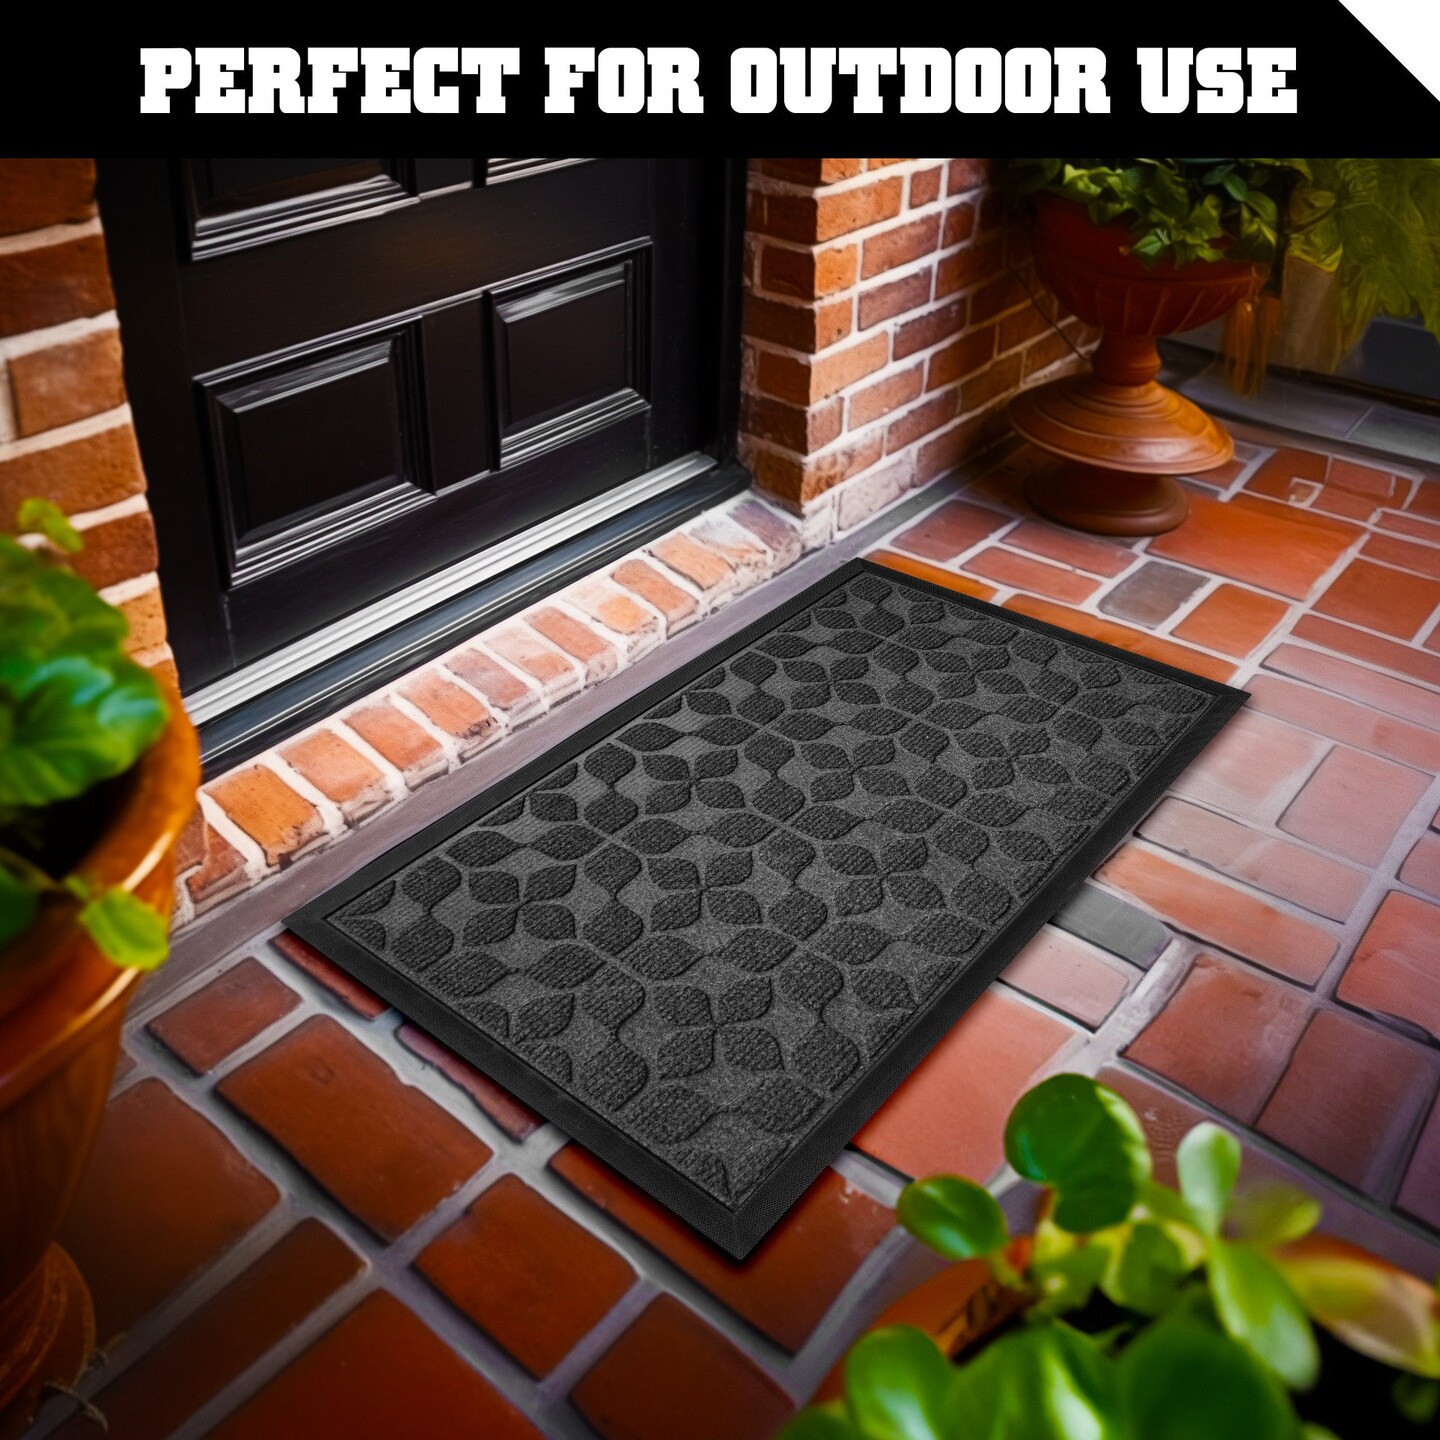 G128 Home Entrance Grey Geometric Floral Pattern Door Mat | 17x29.5 In | Thick Absorbent Natural Rubber Non Slip, Indoor/Outdoor, Easy Clean, Welcome Mats for Front Door/Patio/Garage